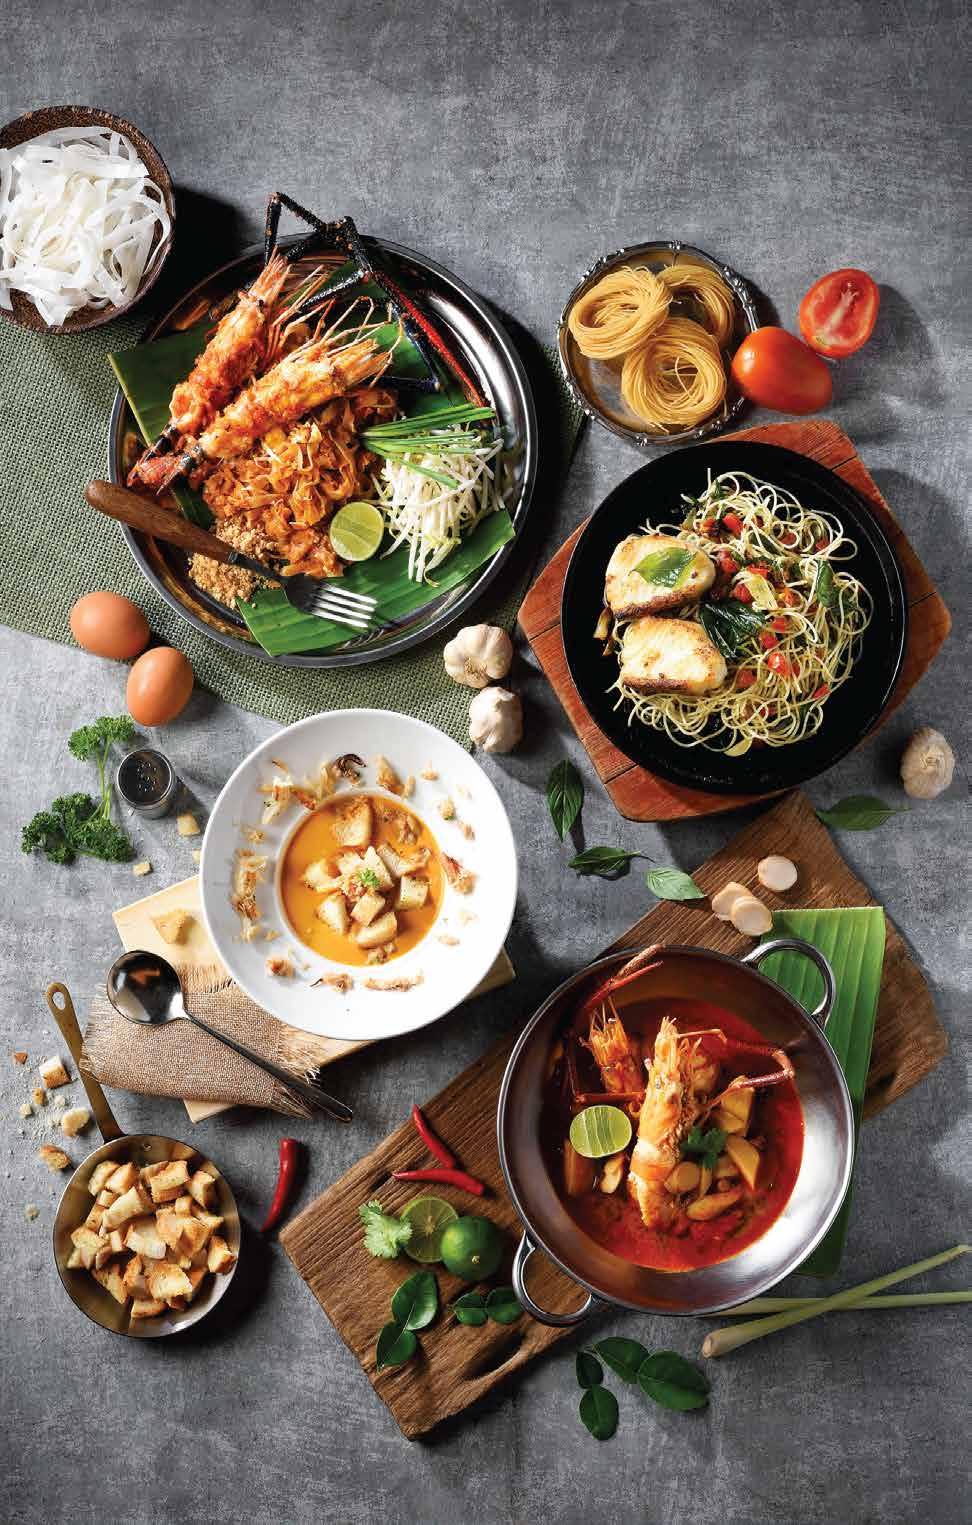 4 Pad Thai Goong CHEF S RECOMMEND 1 Pasta with Snow Fish Fillet 490 pan-fried snow fish with olive oil, garlic, dry chilli, basil, spring onion 2 Crab Soup 250 brandy and blue crab meat 3 Tom Yum